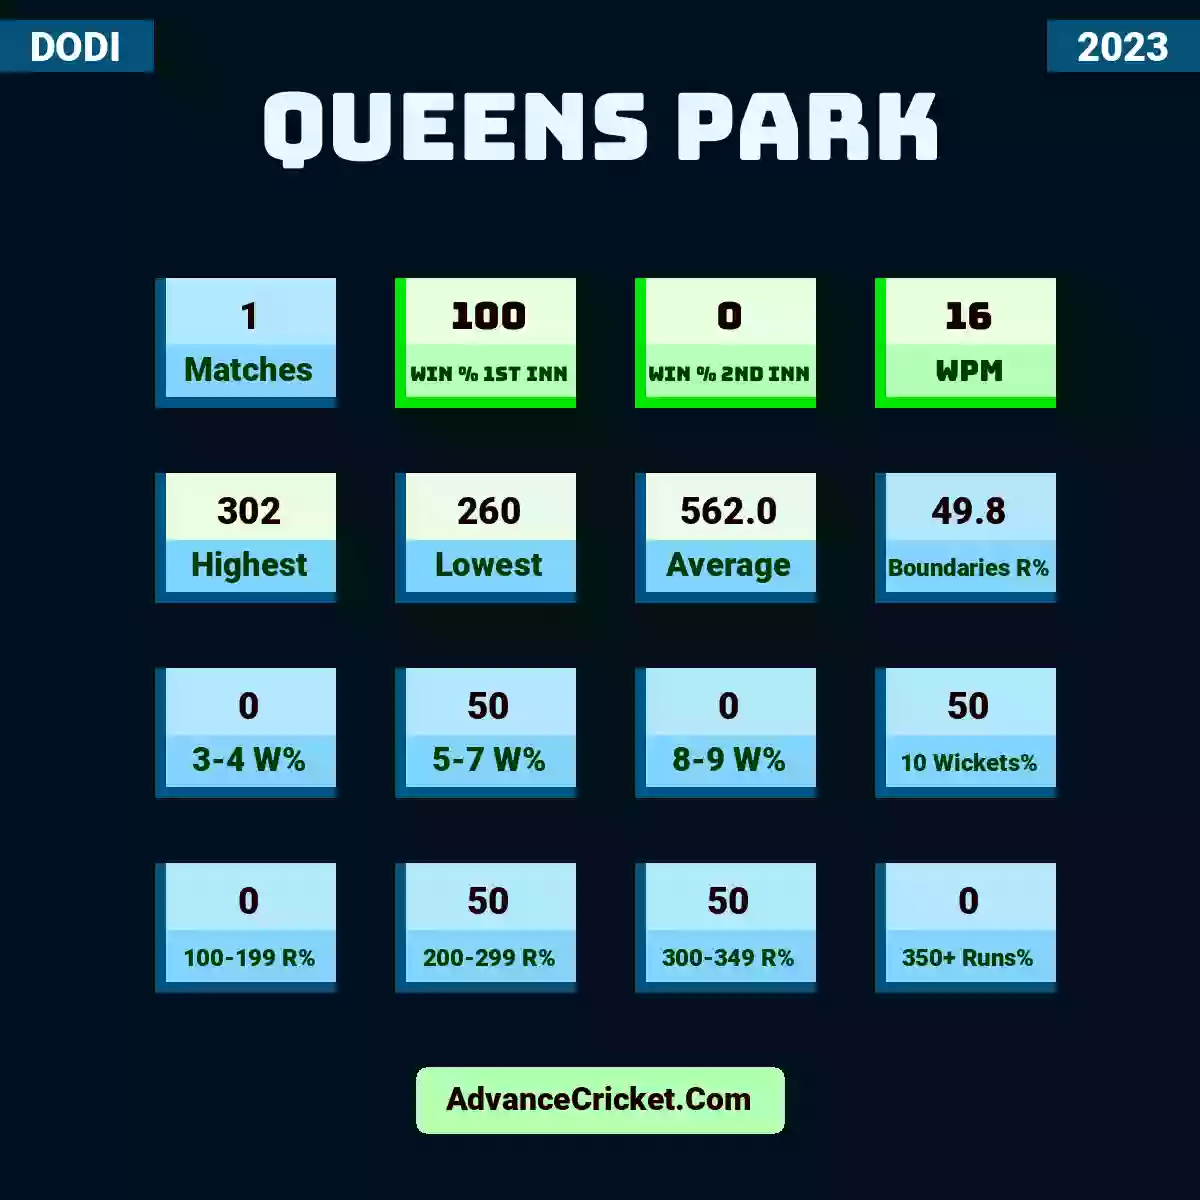 Image showing Queens Park with Matches: 1, Win % 1st Inn: 100, Win % 2nd Inn: 0, WPM: 16, Highest: 302, Lowest: 260, Average: 562.0, Boundaries R%: 49.8, 3-4 W%: 0, 5-7 W%: 50, 8-9 W%: 0, 10 Wickets%: 50, 100-199 R%: 0, 200-299 R%: 50, 300-349 R%: 50, 350+ Runs%: 0.